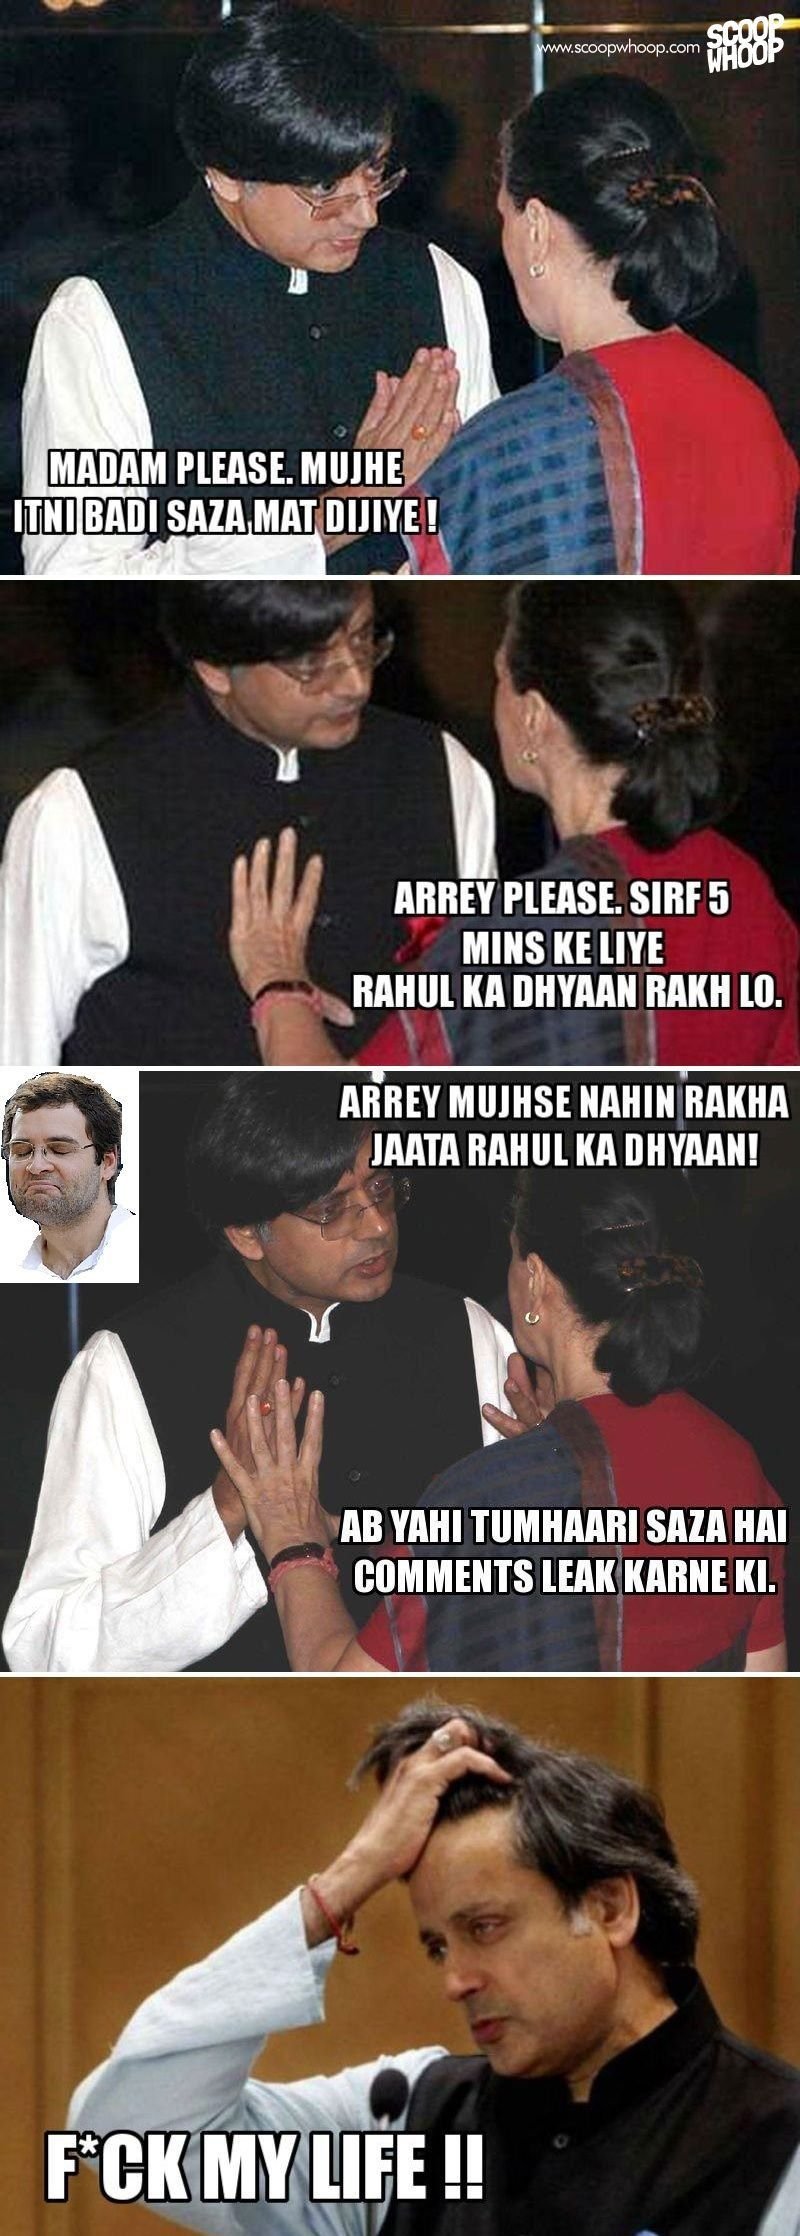 These Funny Sonia Gandhi-Shashi Tharoor Memes Explain What Went Down  Between Them